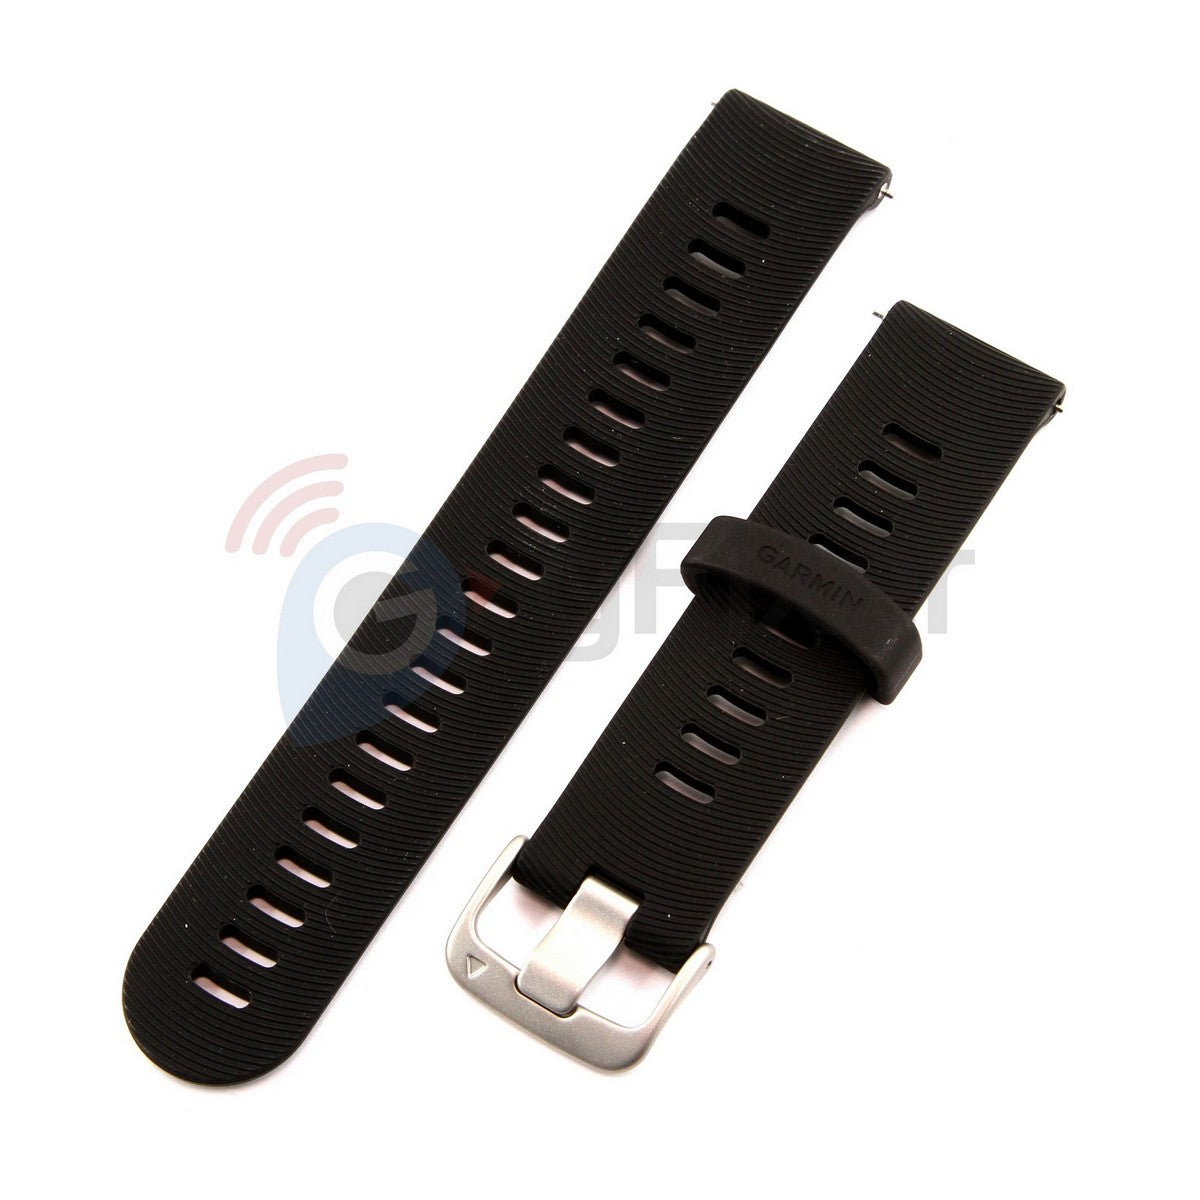 Silicone band  for Garmin Forerunner 645 Black. QuickFit 20mm. OEM (without screwdrivers and box) New